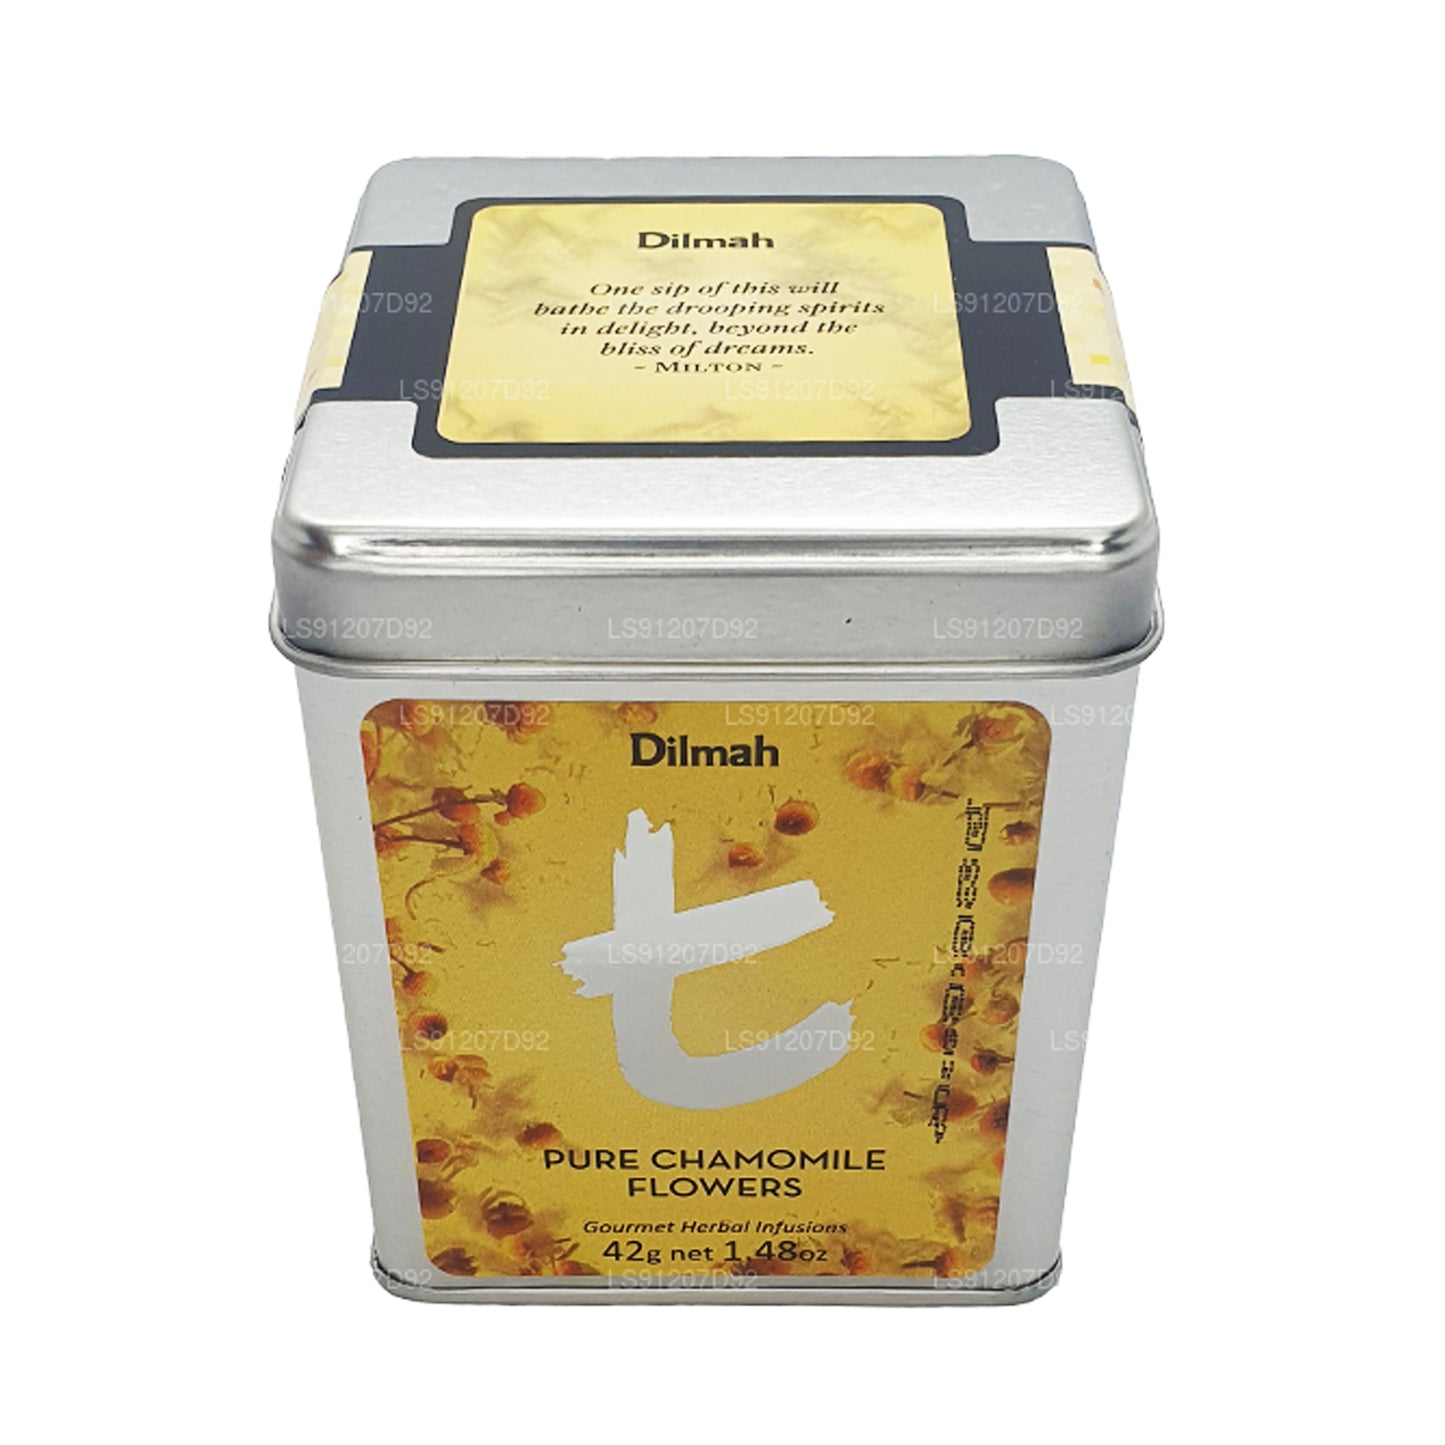 Dilmah t-Series Pure Camomile Flowers (42g)